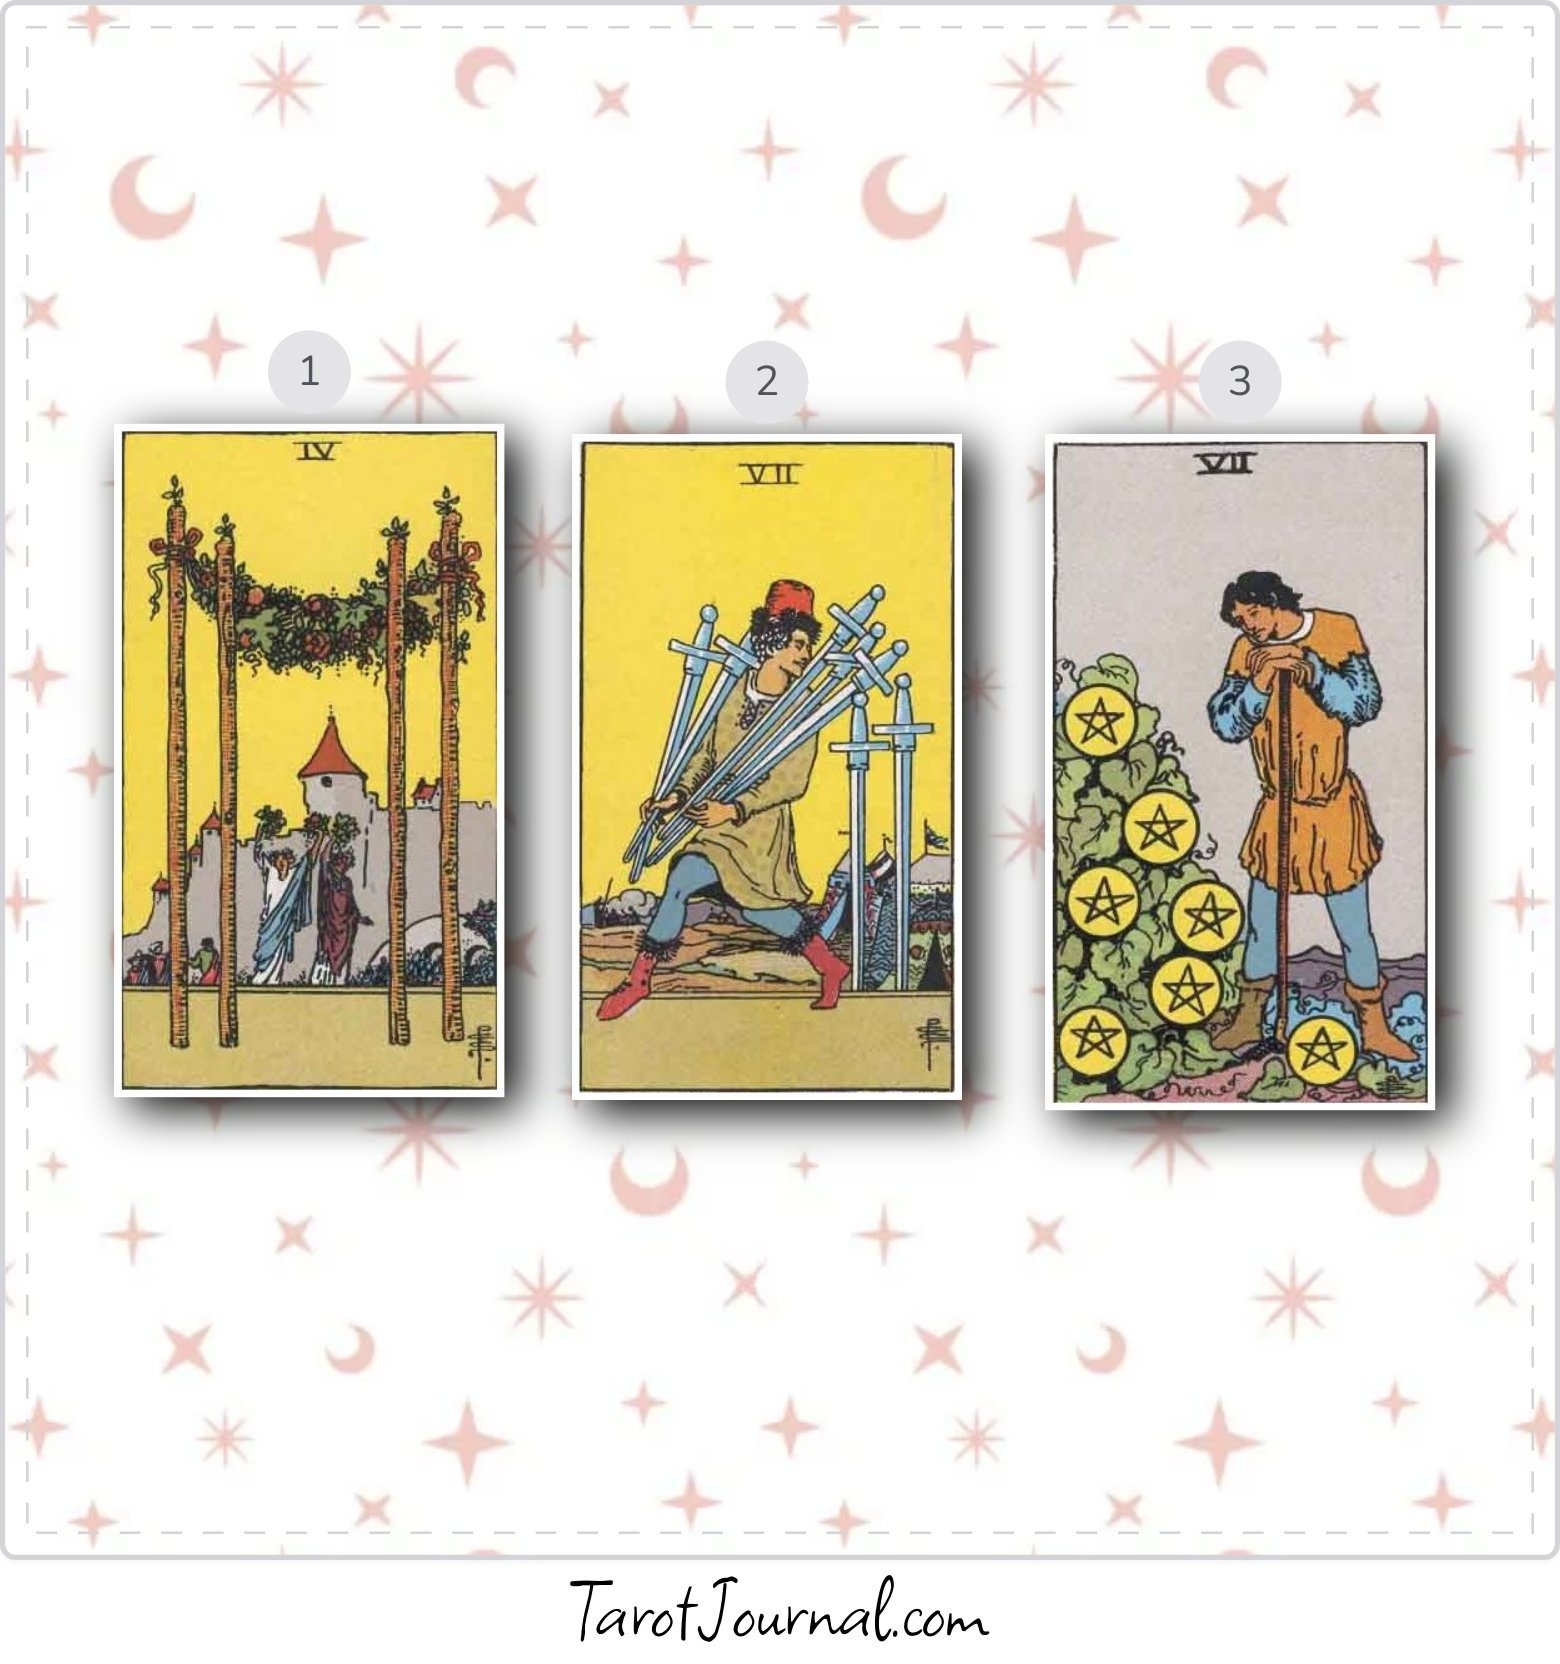 Daily self-reflection - tarot reading by Ici La Lune